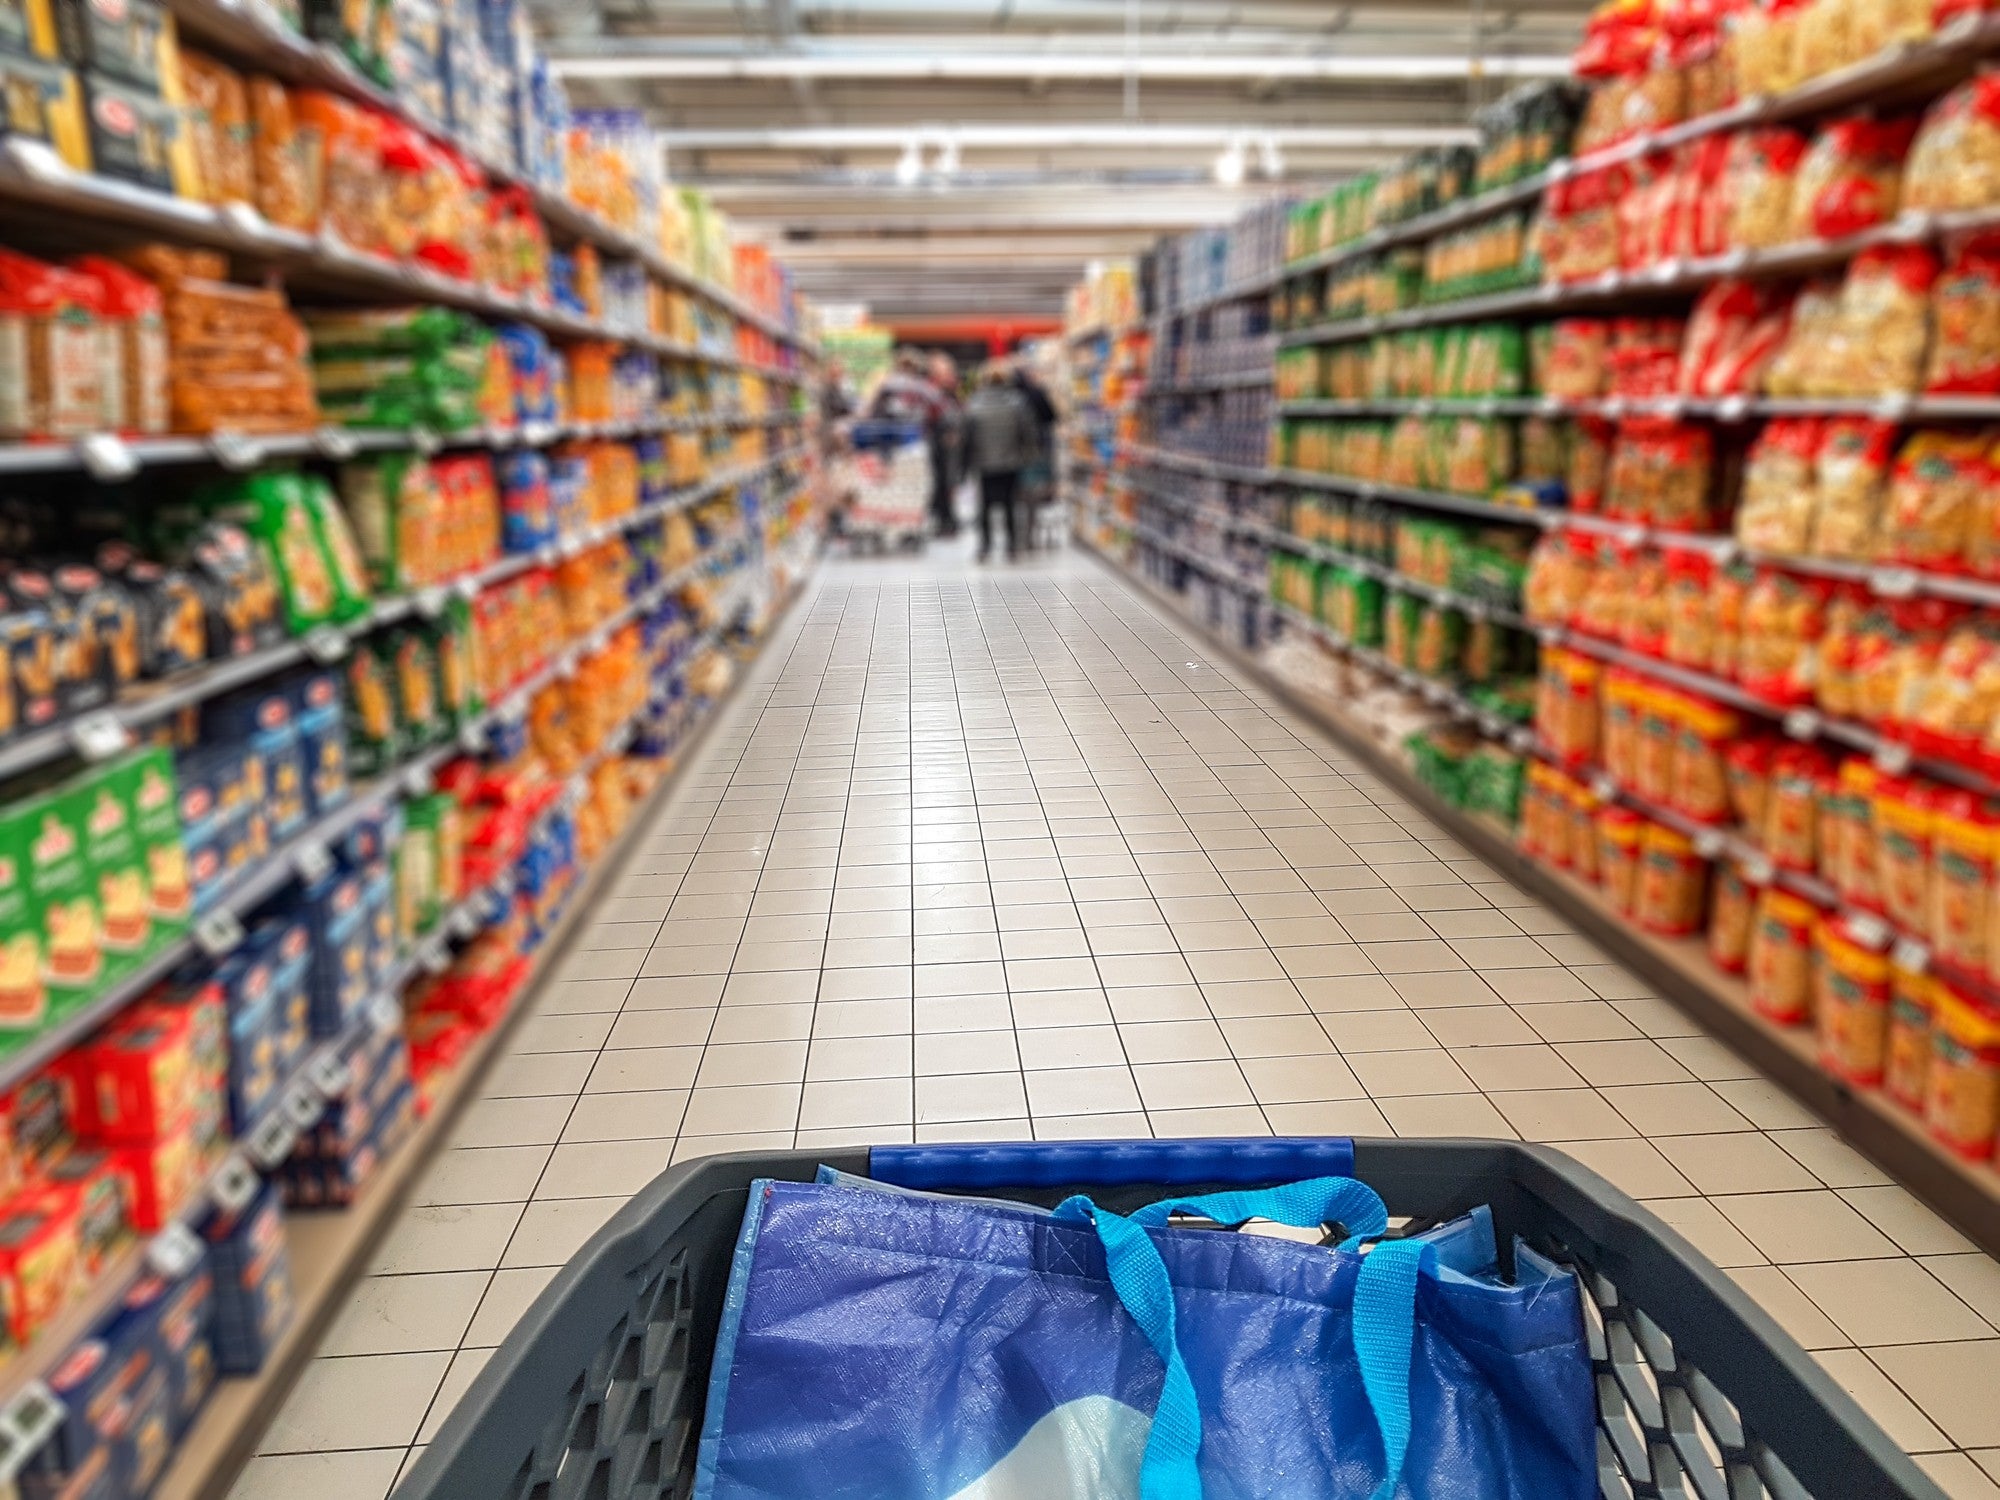 The French government is furious that prices consumers pay in supermarkets have hit record levels in recent months